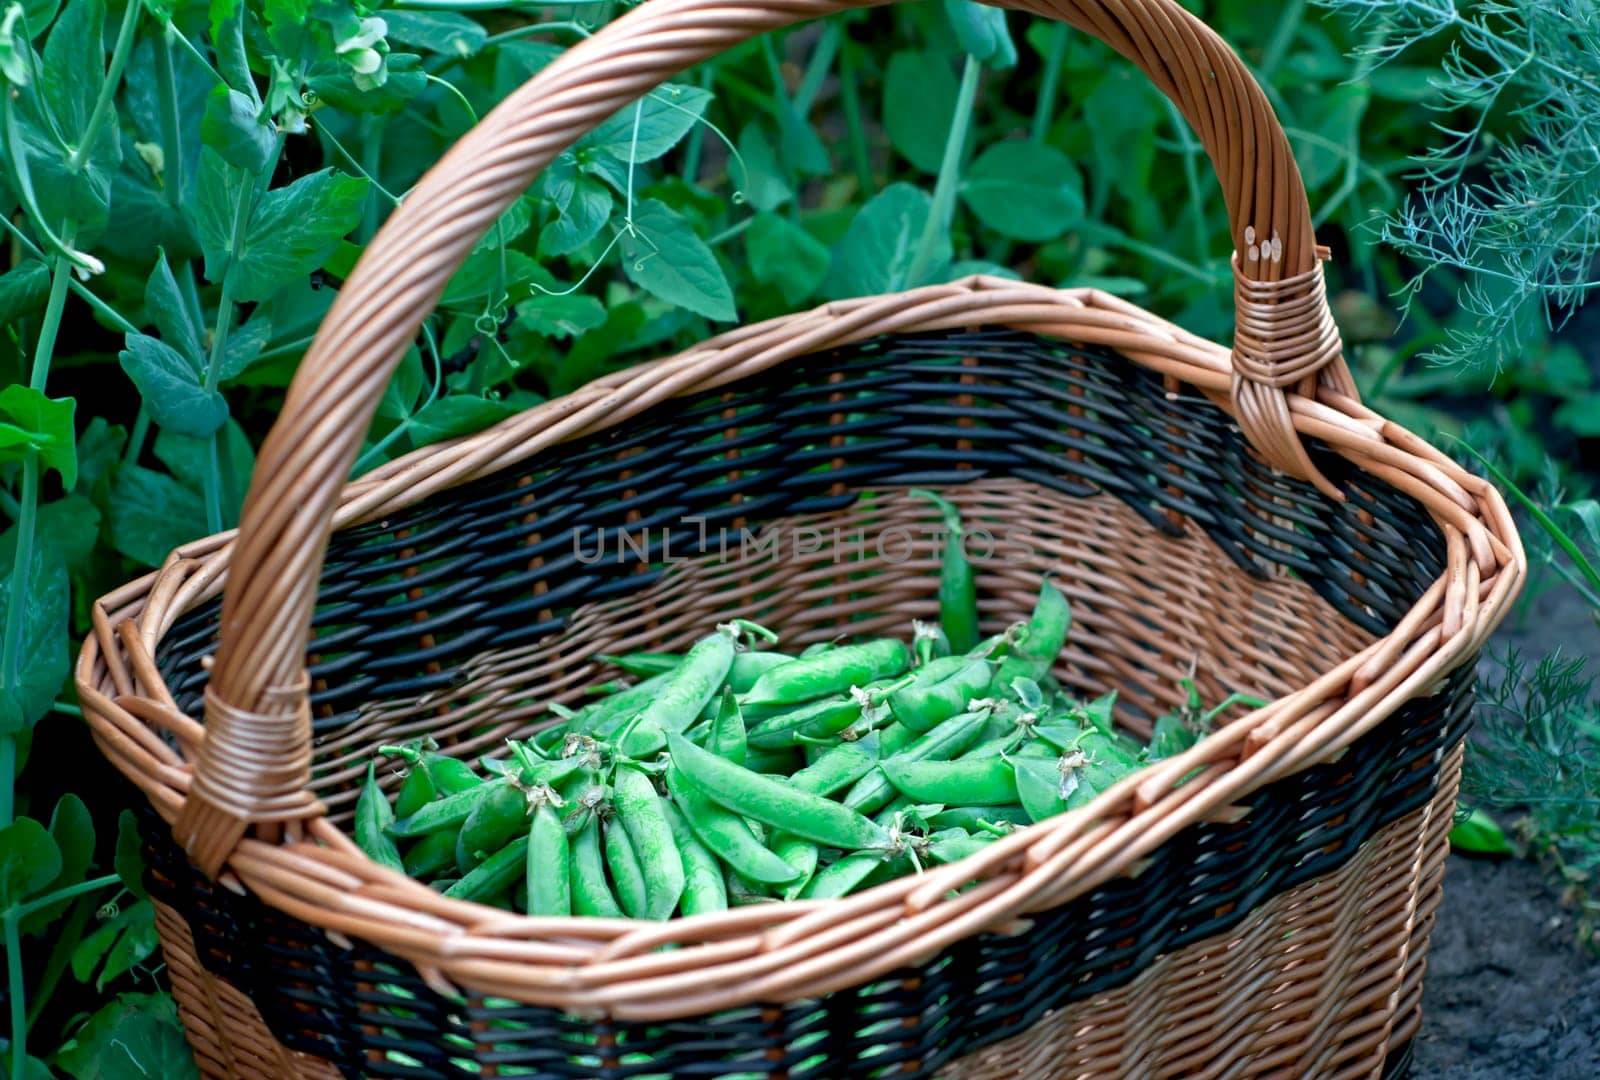 Raw pods of green sugar peas in baskets are harvested in the garden by aprilphoto